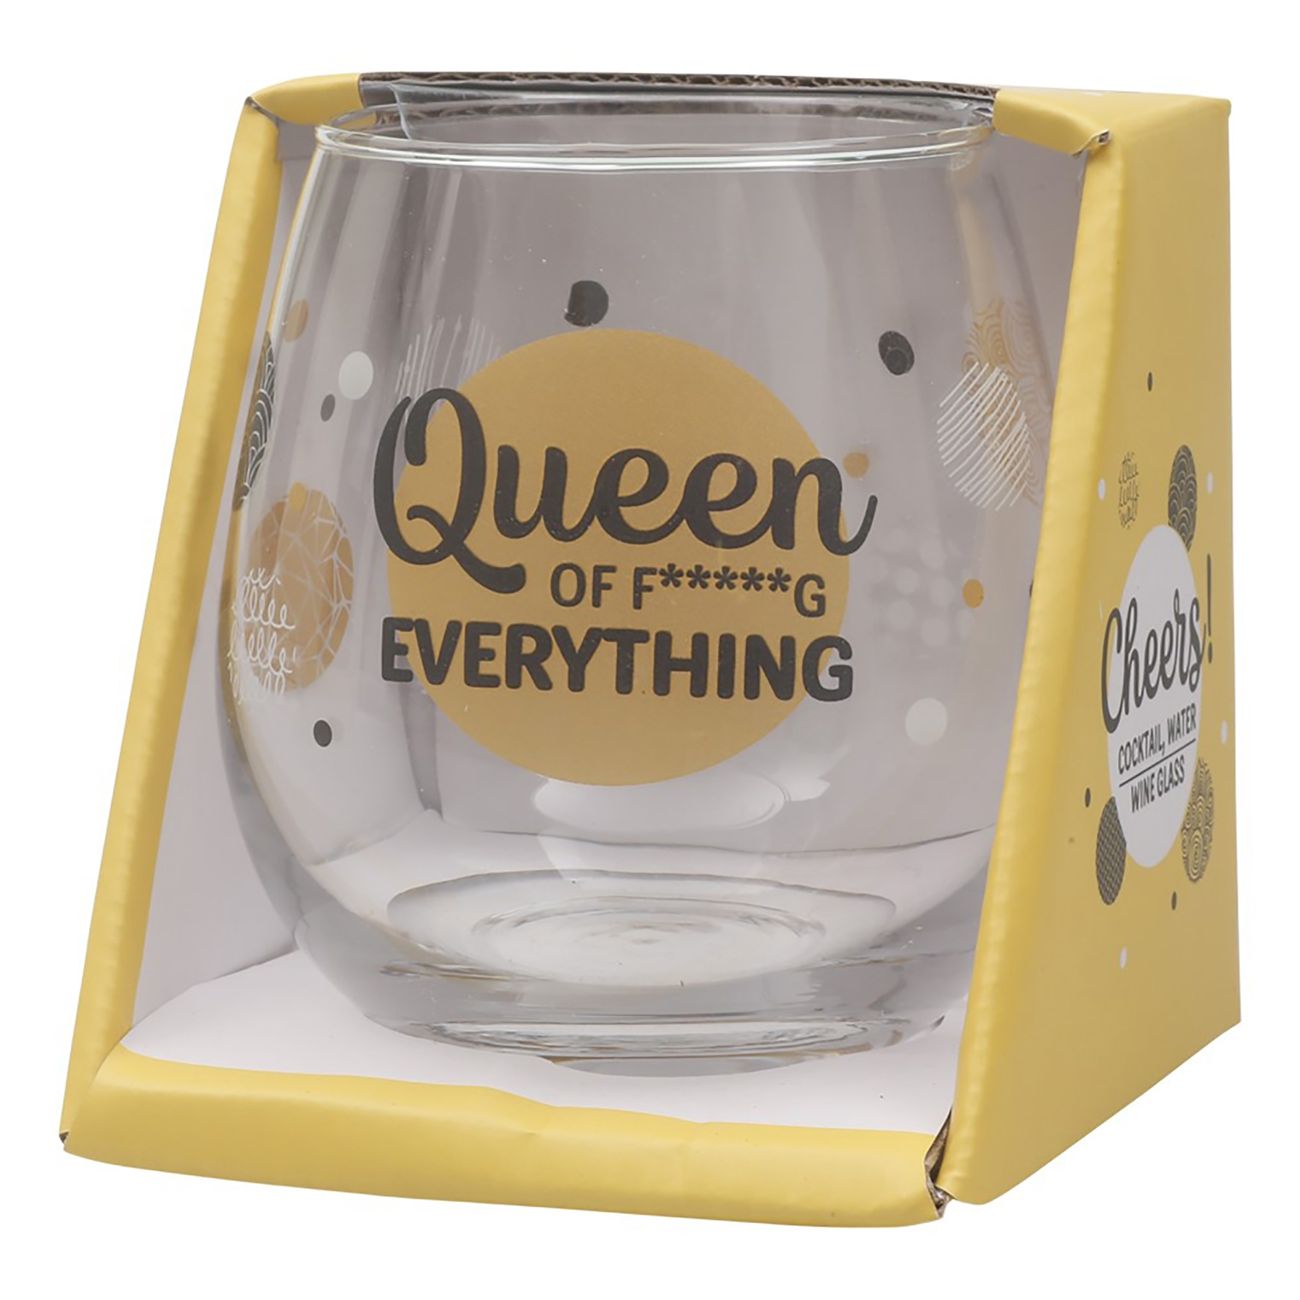 glas-queen-of-fg-everything-91237-1